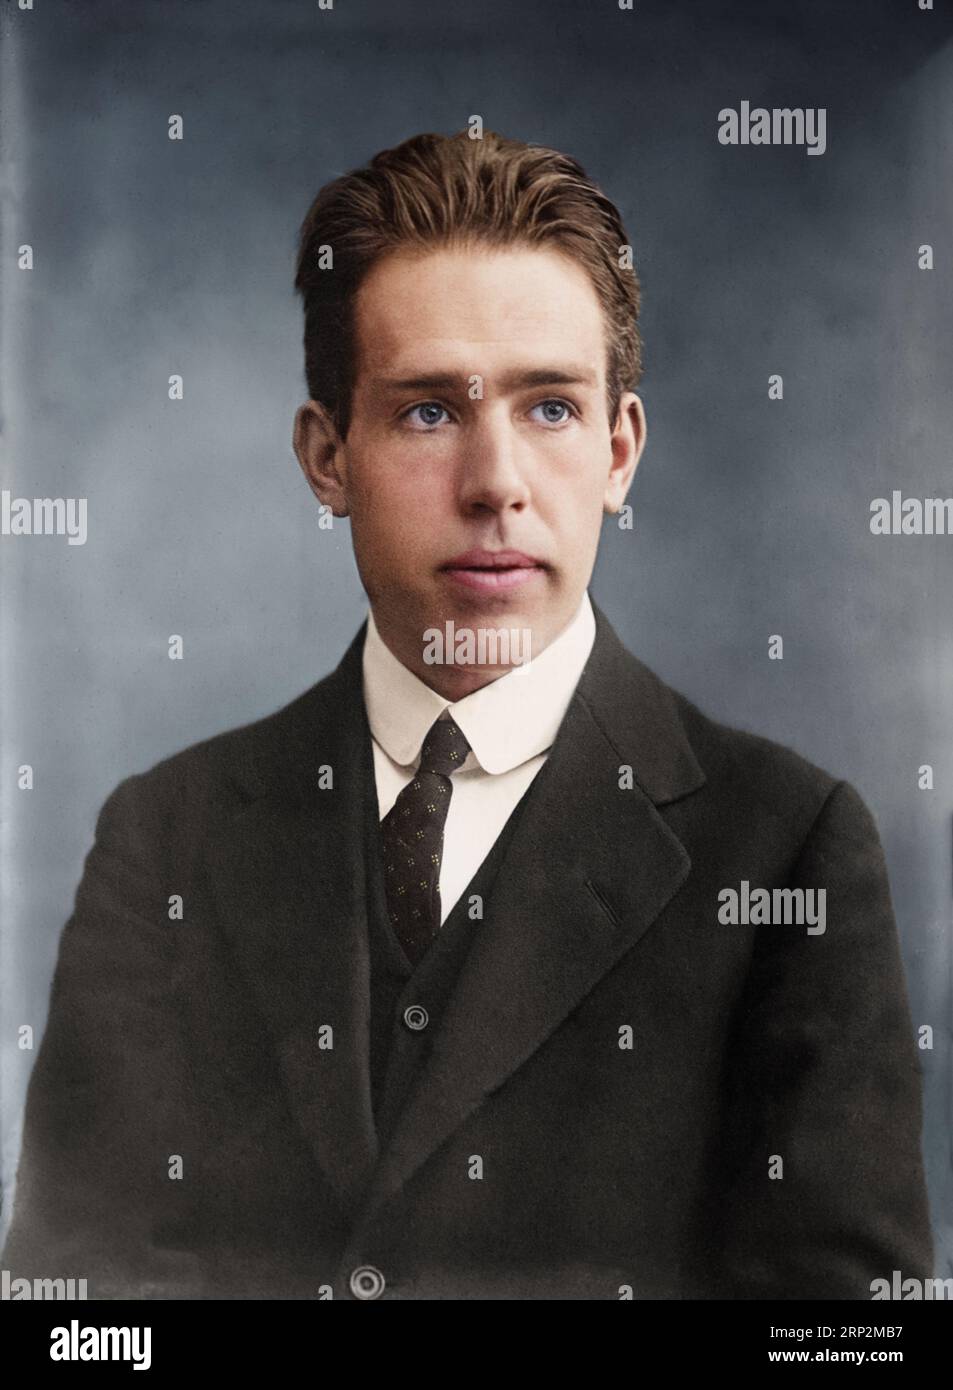 Prof. Niels Bohr. Circa 1910. LoC states the date to be around 1920-25 but based on his appearance, the photograph is closer to 1910. Stock Photo